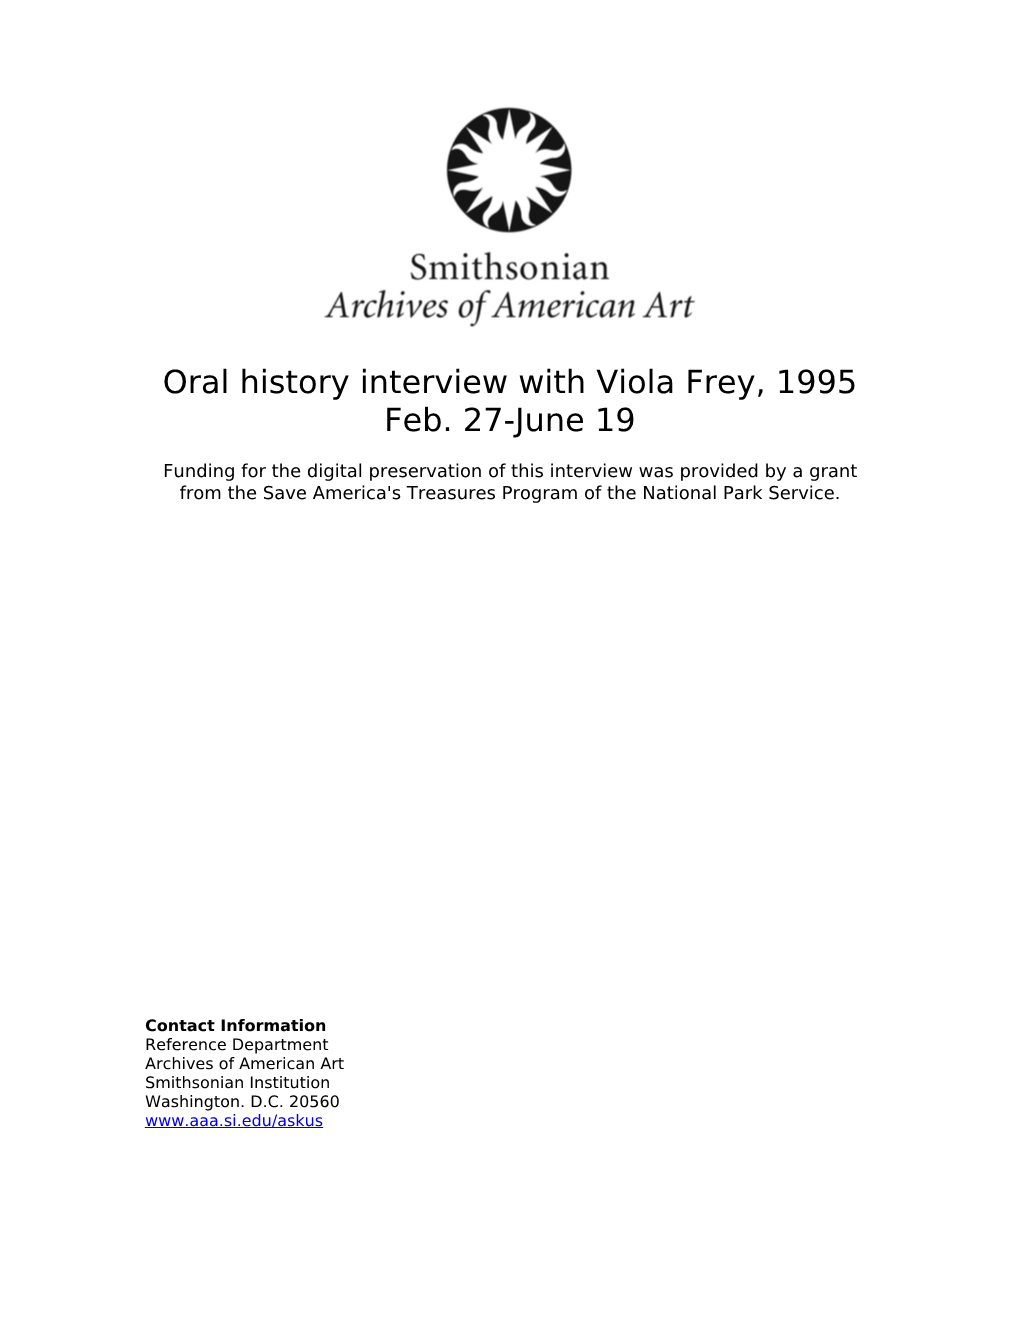 Oral History Interview with Viola Frey, 1995 Feb. 27-June 19